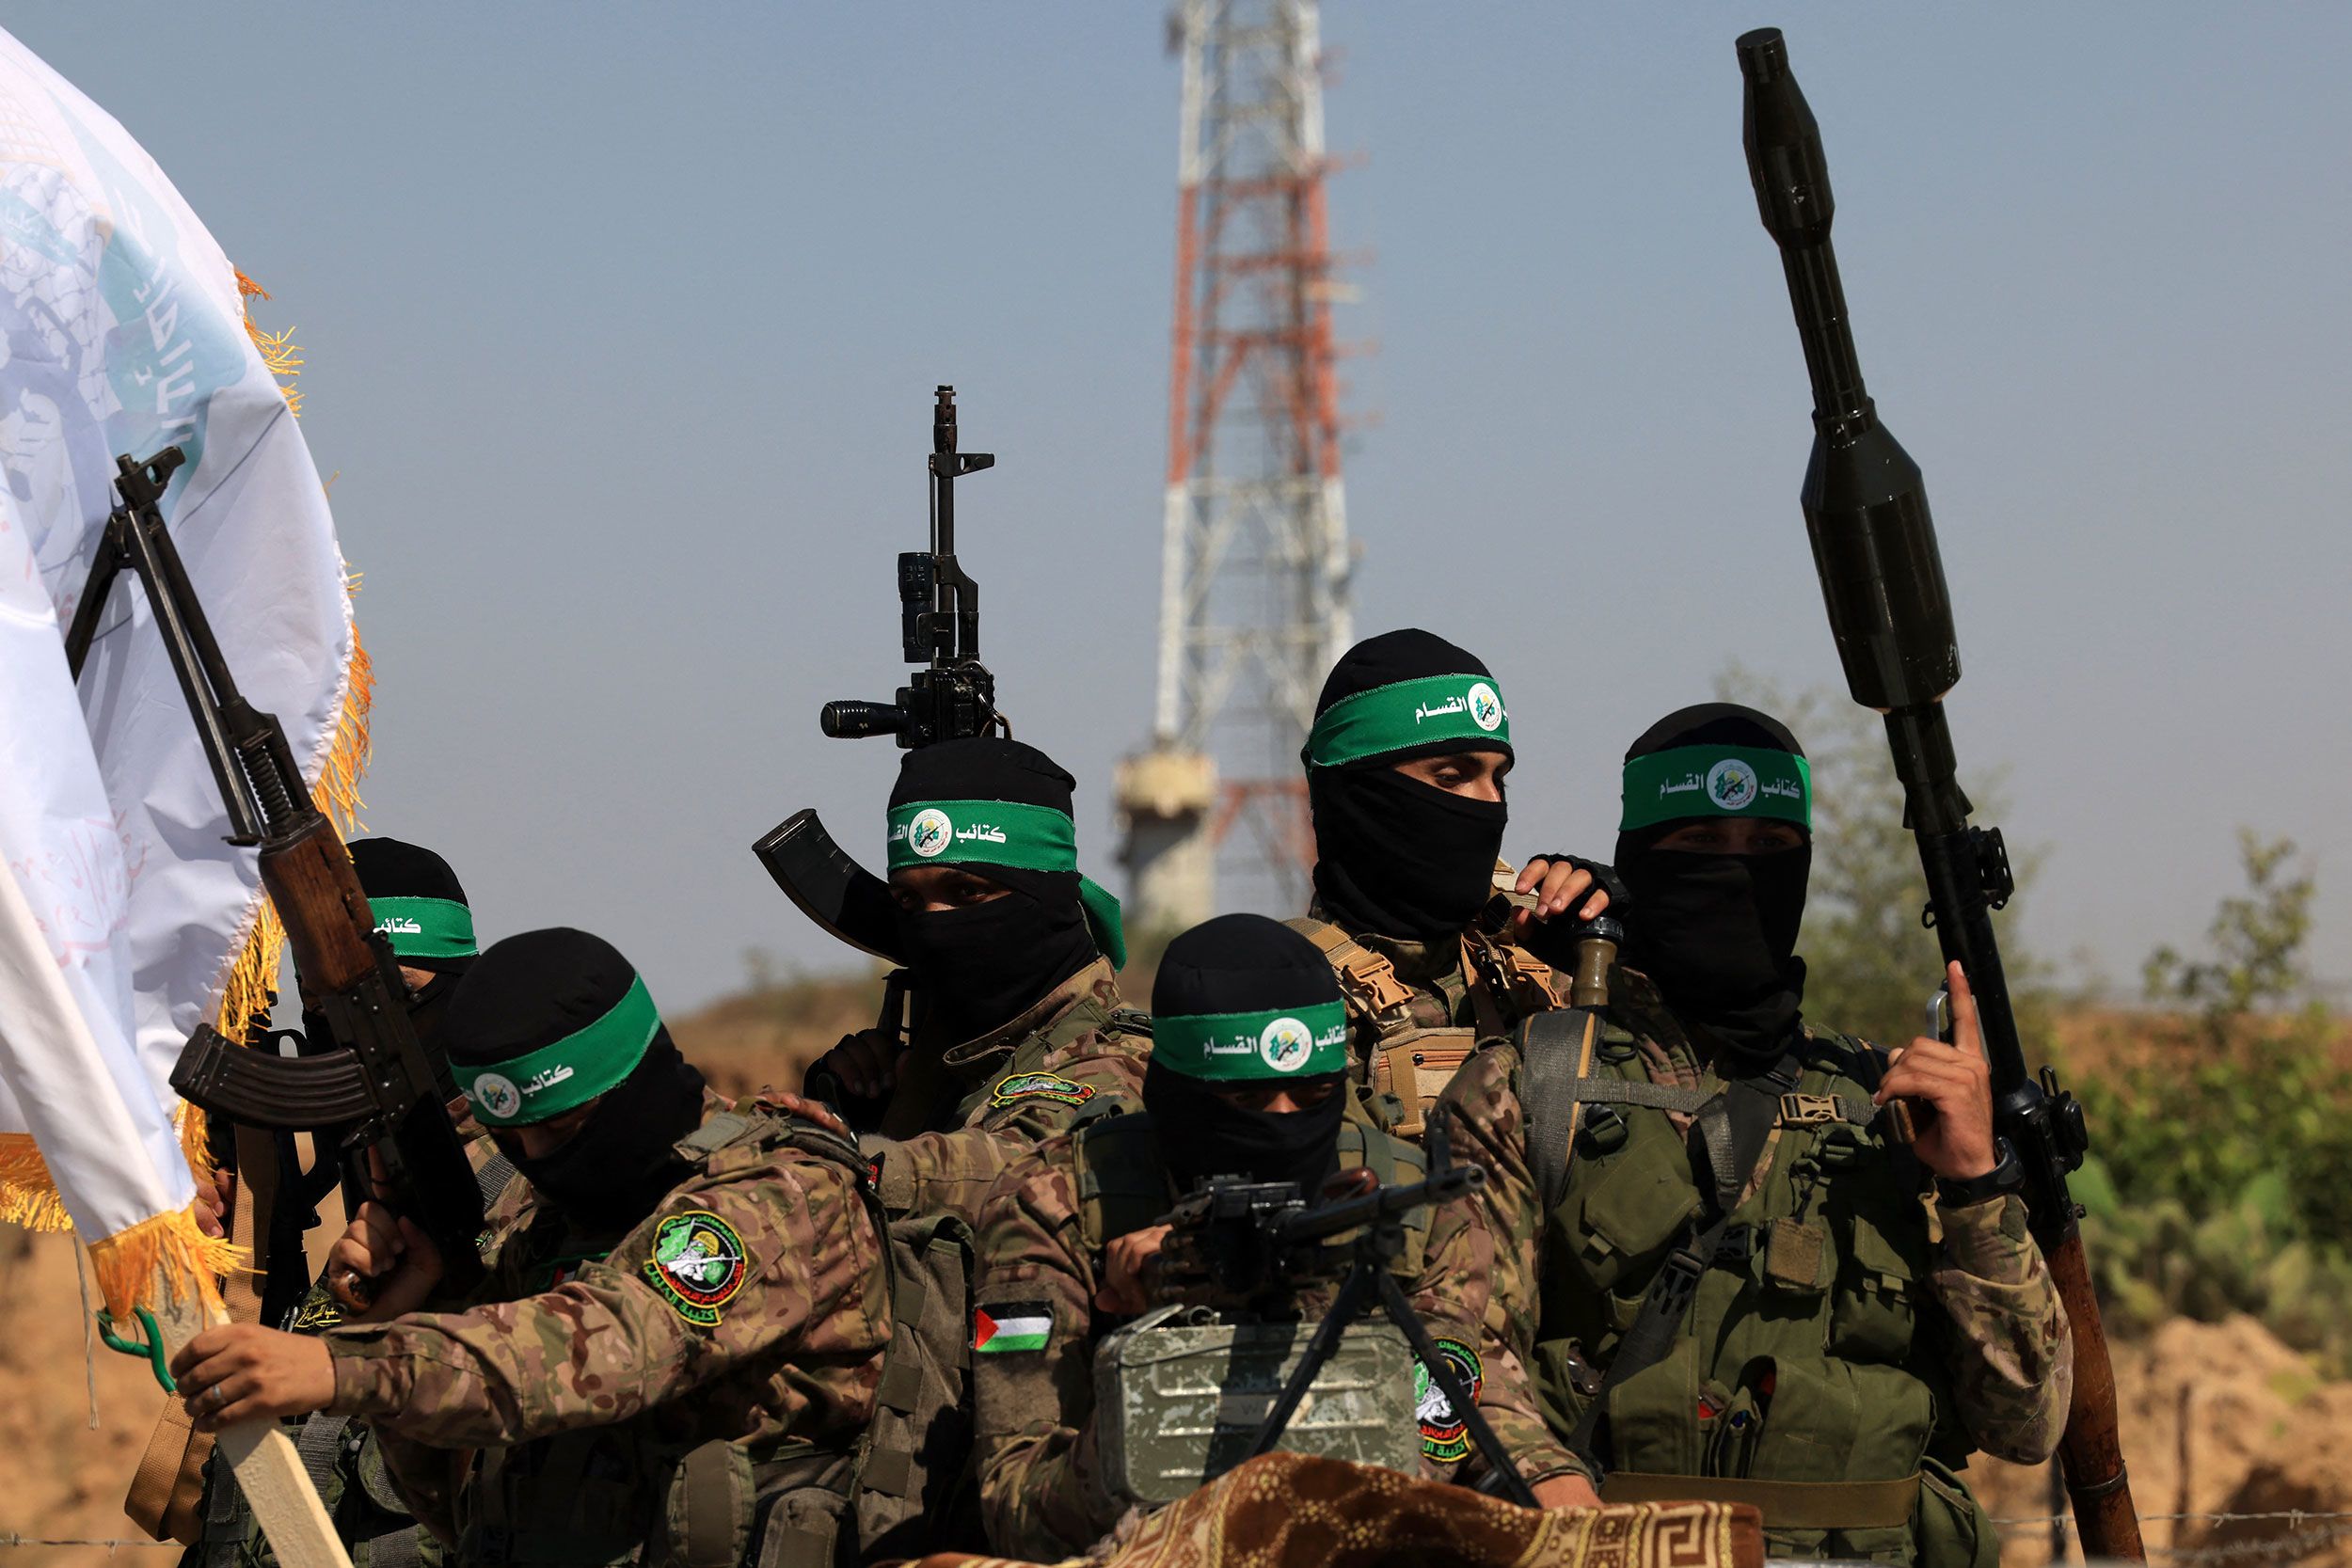 Hamas May Be Threat to 8chan, QAnon Online – Krebs on Security